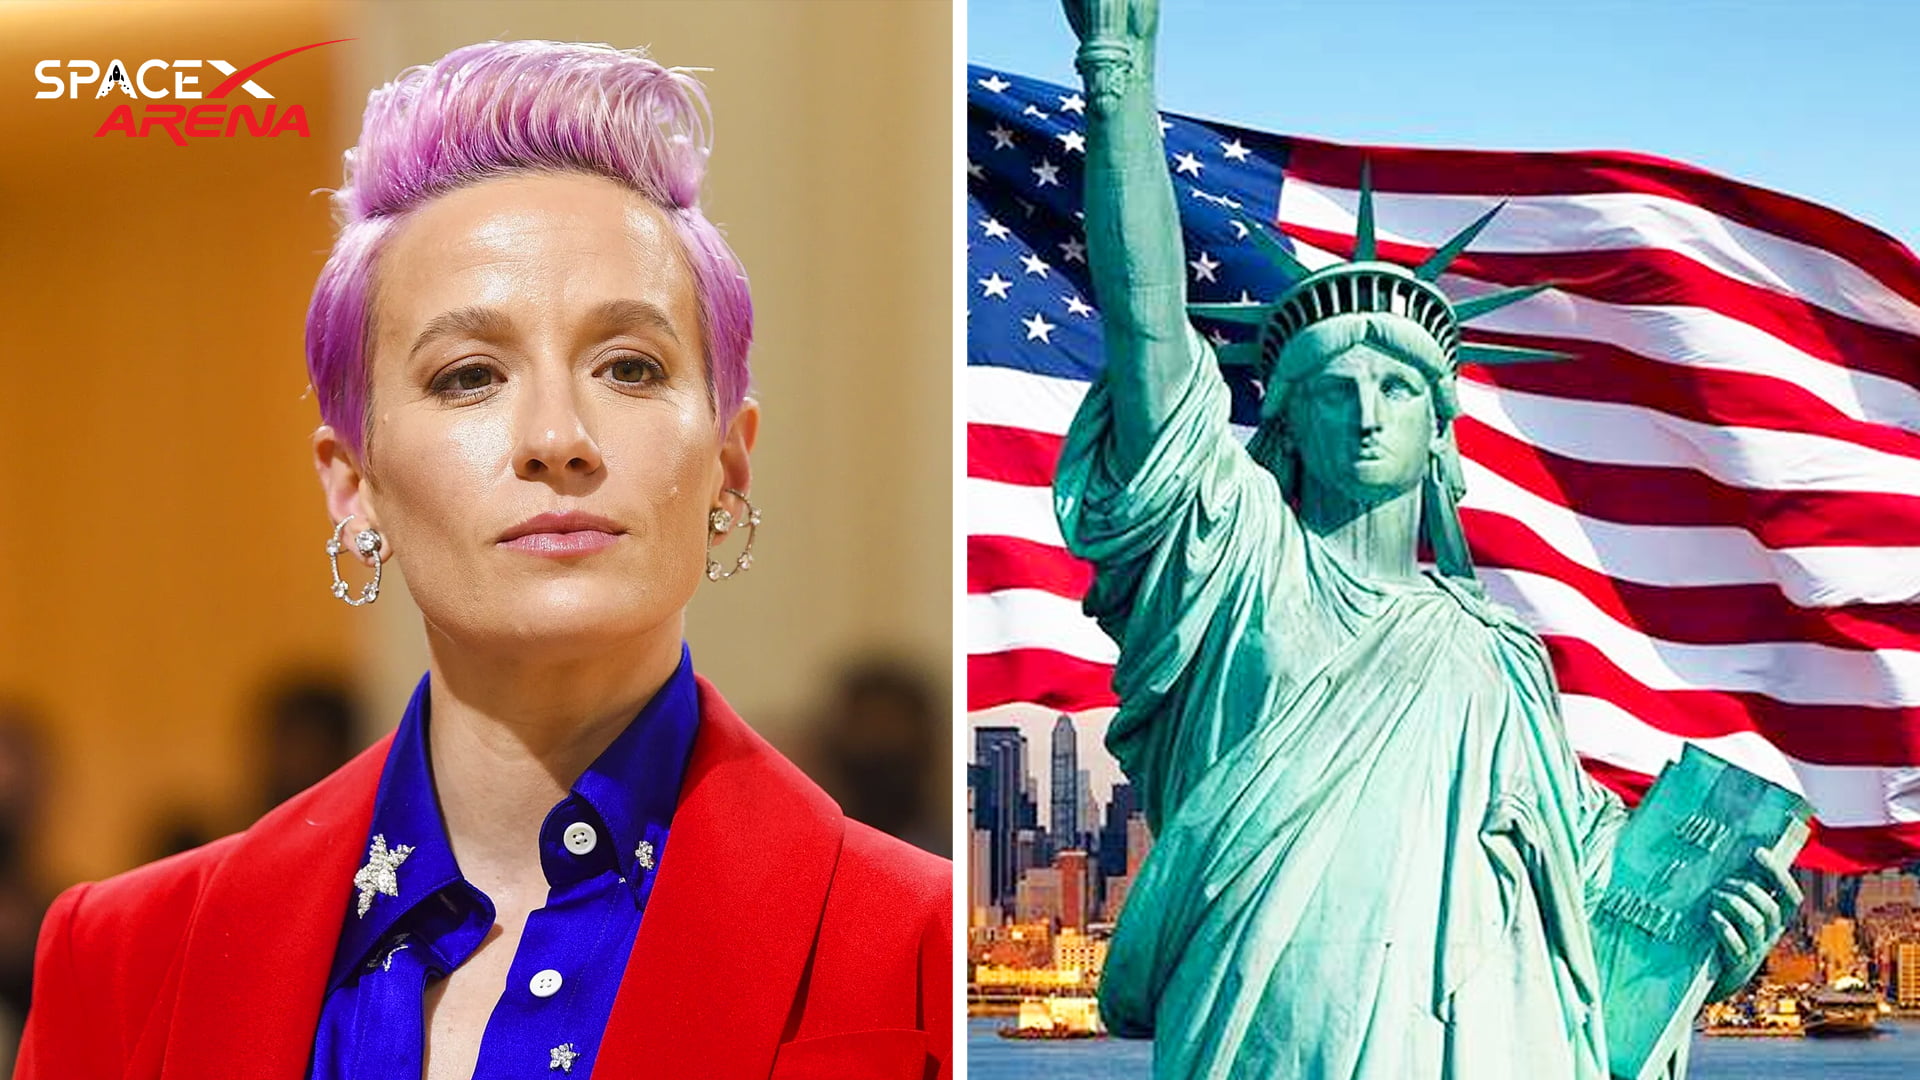 FEATURED, HOLLYWOOD, SATIRE, AMERICAN SOCIETY, CELEBRITY DEPARTURES, DISSENT, LEGACY, MEDIA INFLUENCE, MEGAN RAPINOE, POLARIZATION, SOCIAL ACTIVISM, SOCIAL JUSTICE MOVEMENTS, USWNT